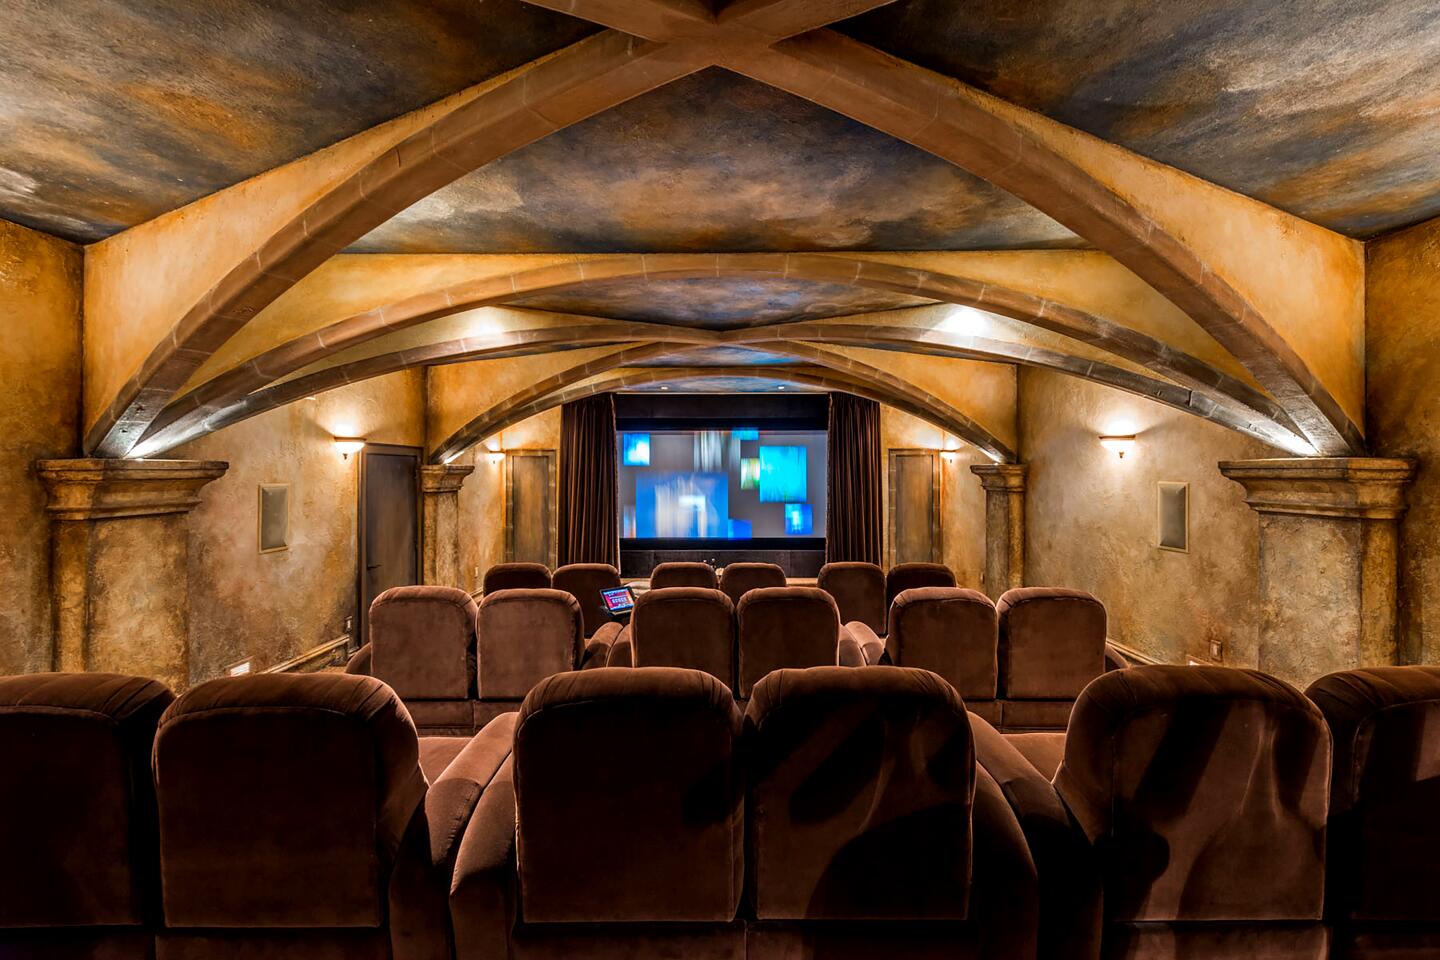 A movie theater is also part of the estate.